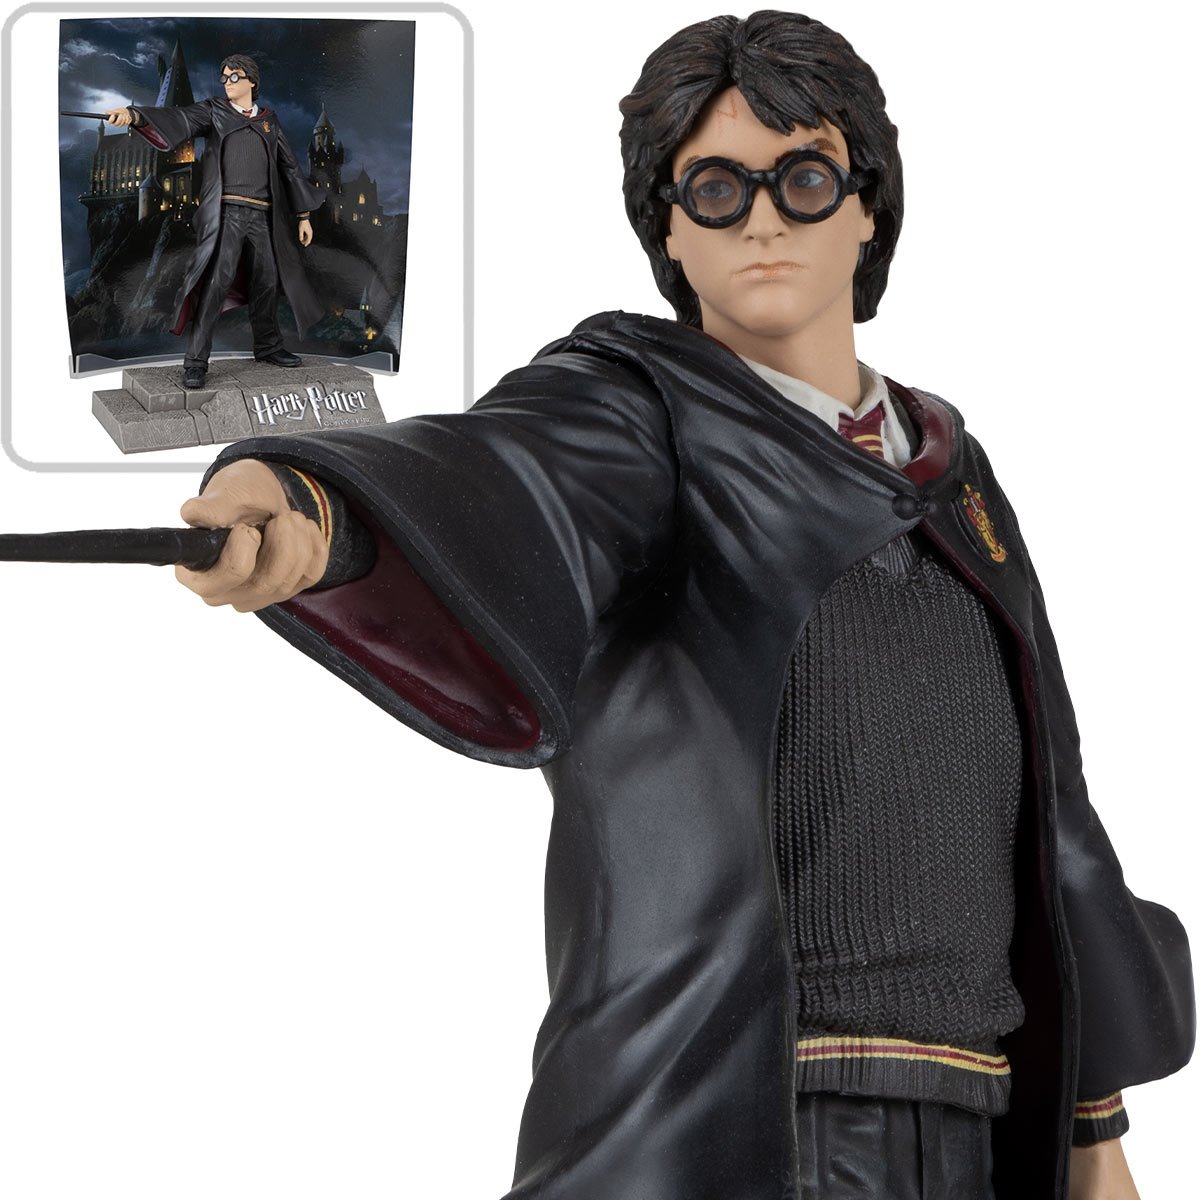 Officially Licensed Harry Potter Sculpted First Year Film Figure